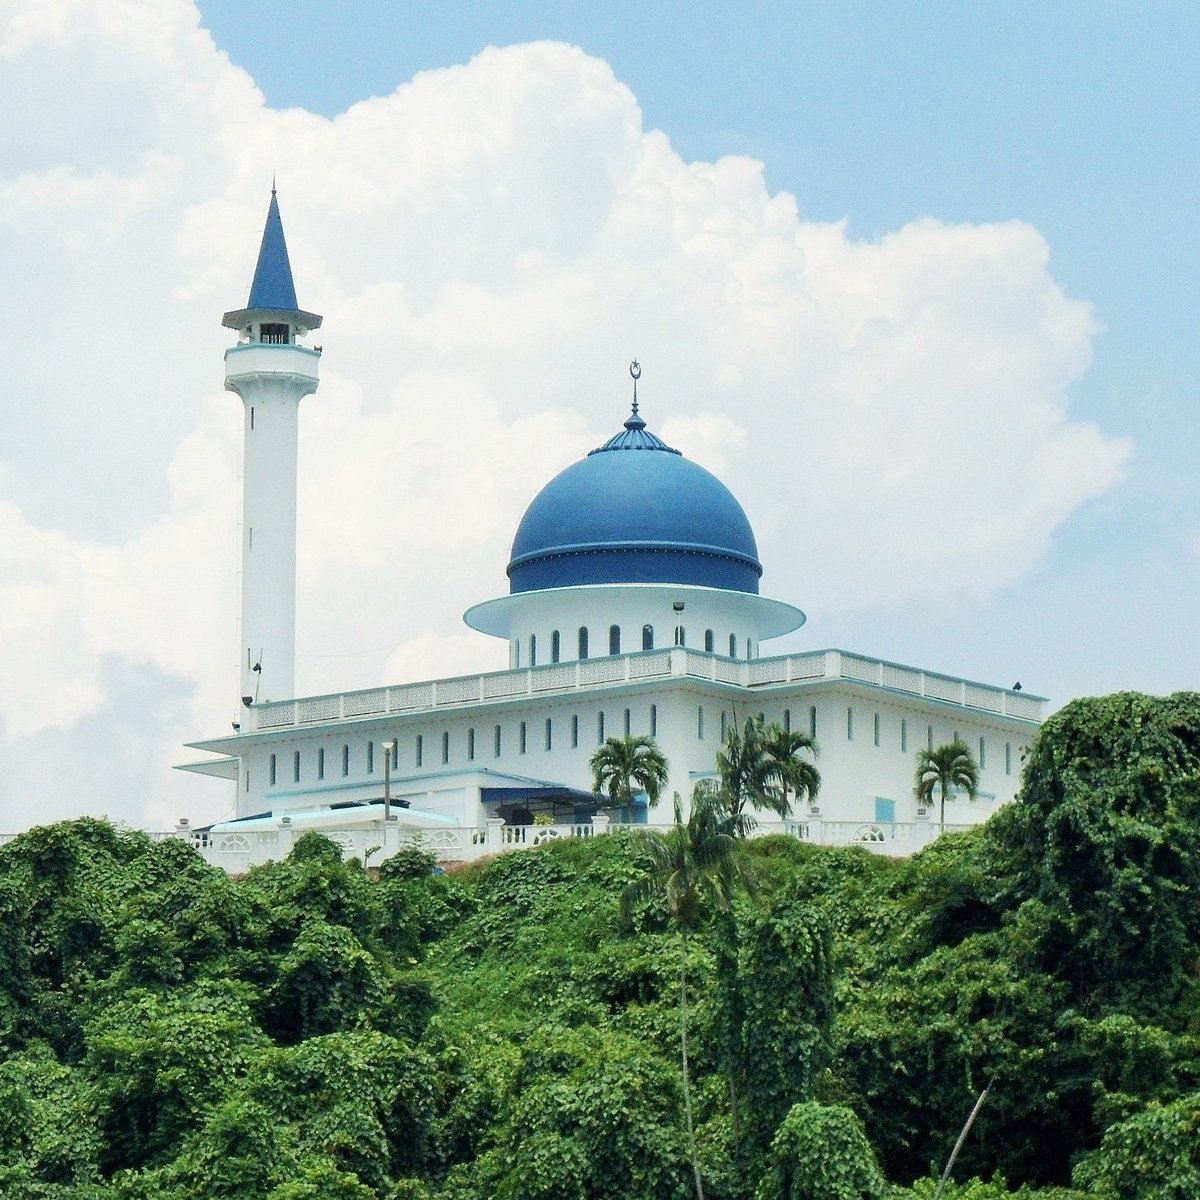 Masjid Jamek Bandar Mersing - All You Need to Know BEFORE You Go